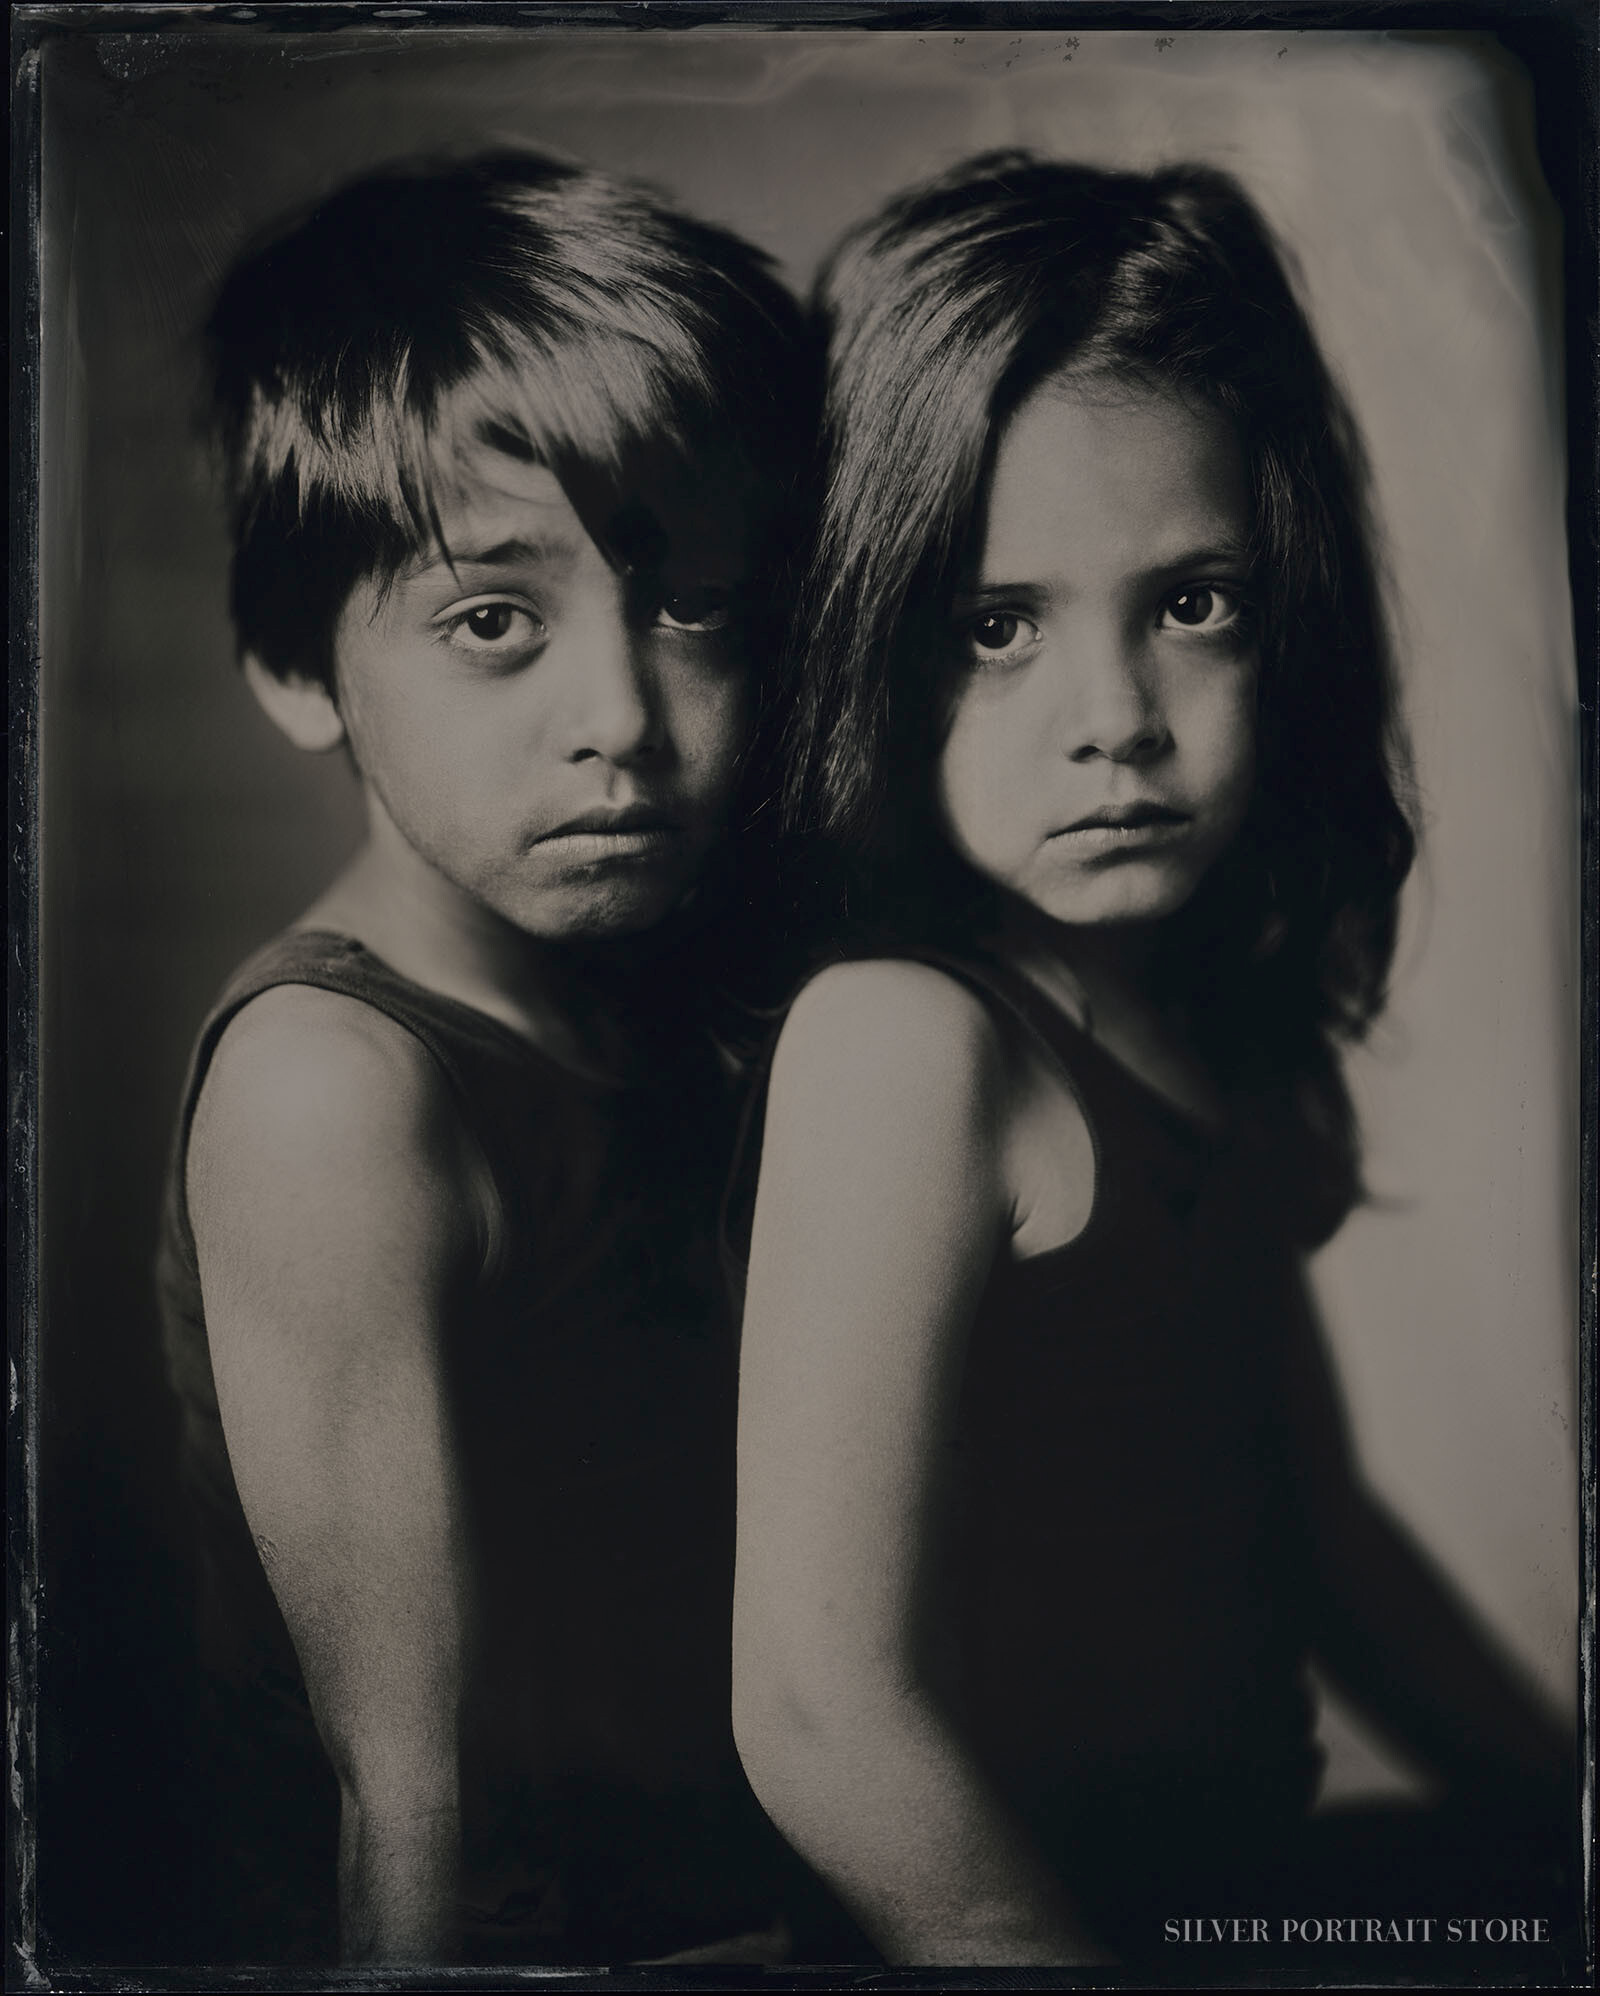 Marius & Dewi-Silver Portrait Store-Scan from Wet plate collodion-Tintype 20 x 25 cm.